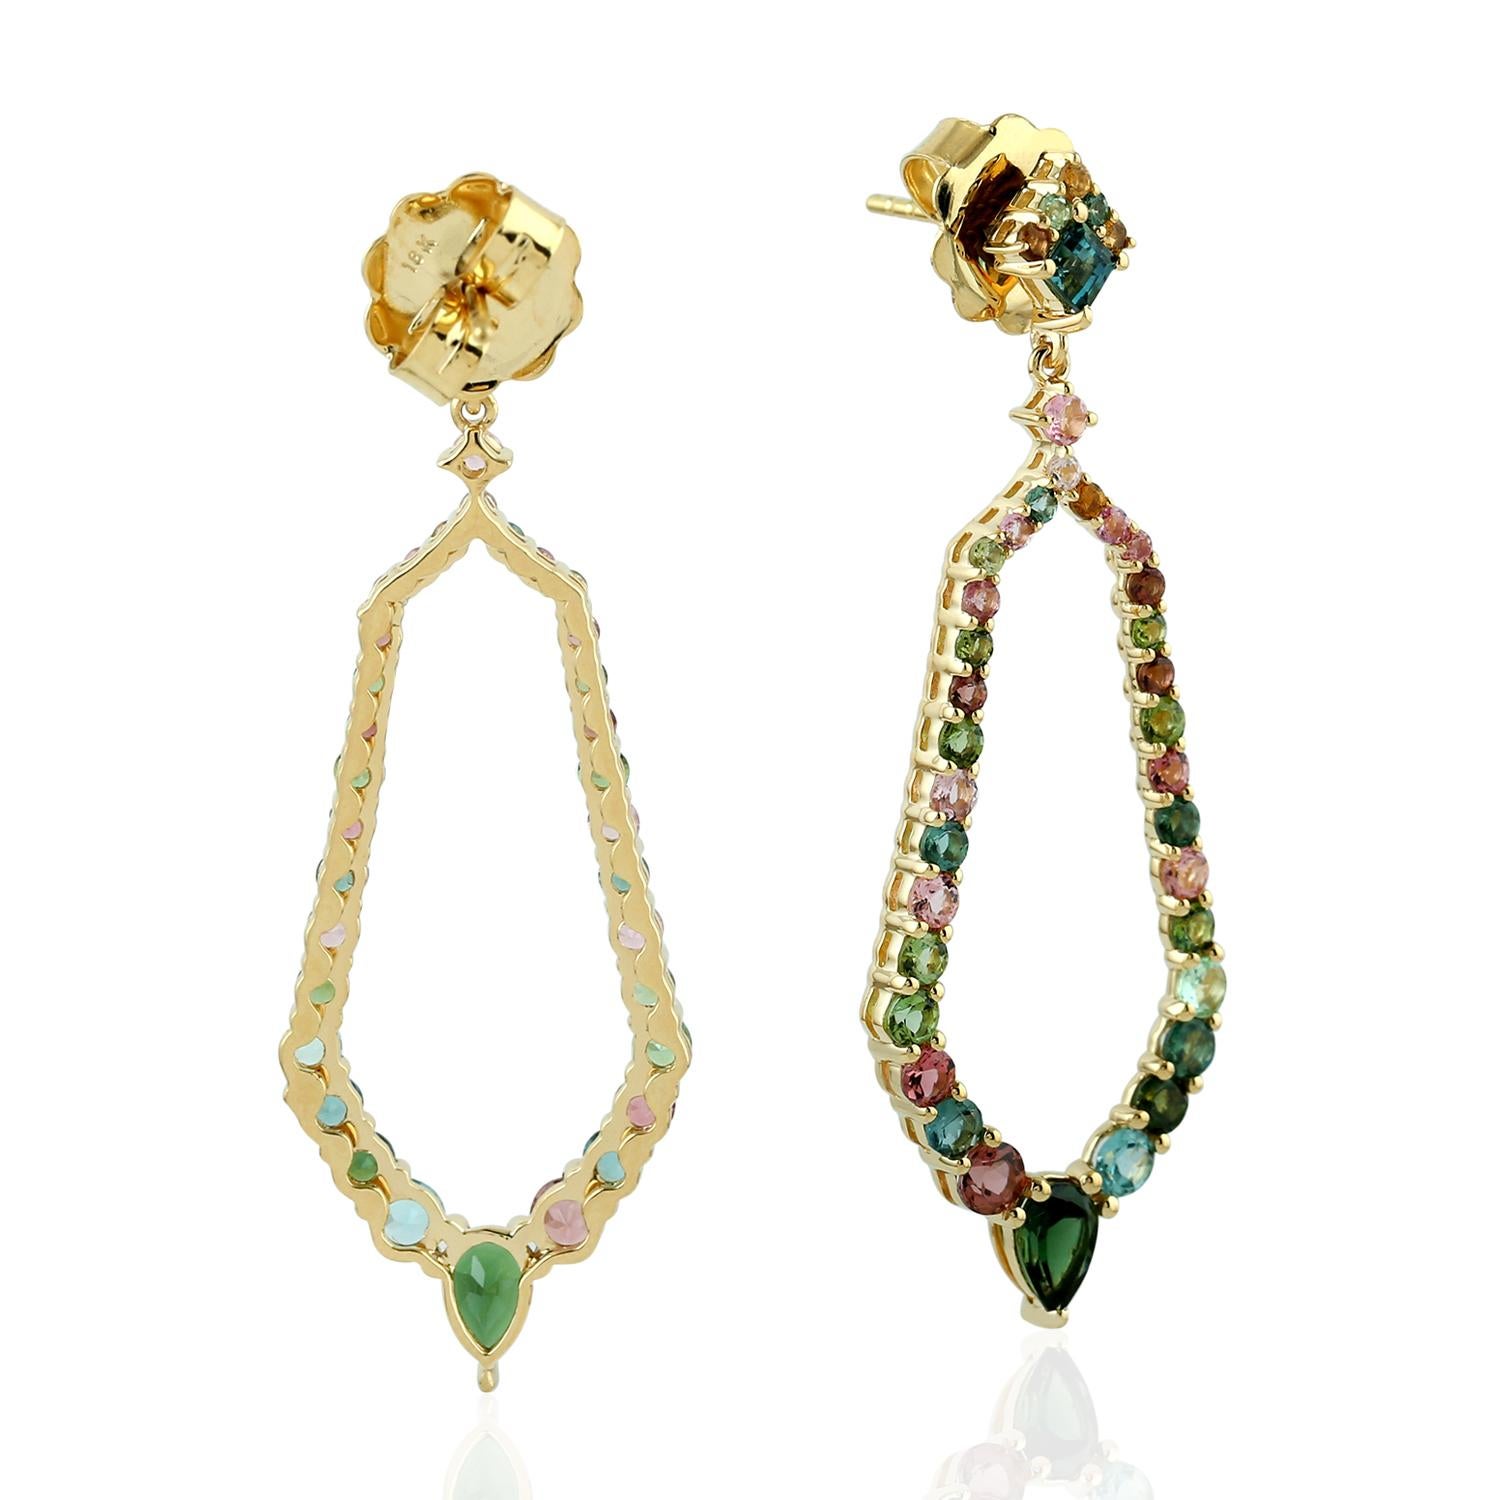 These tourmaline earrings are true stunners. It is hand set in 18K gold and 3.75 carats tourmaline.

FOLLOW  MEGHNA JEWELS storefront to view the latest collection & exclusive pieces.  Meghna Jewels is proudly rated as a Top Seller on 1stdibs with 5